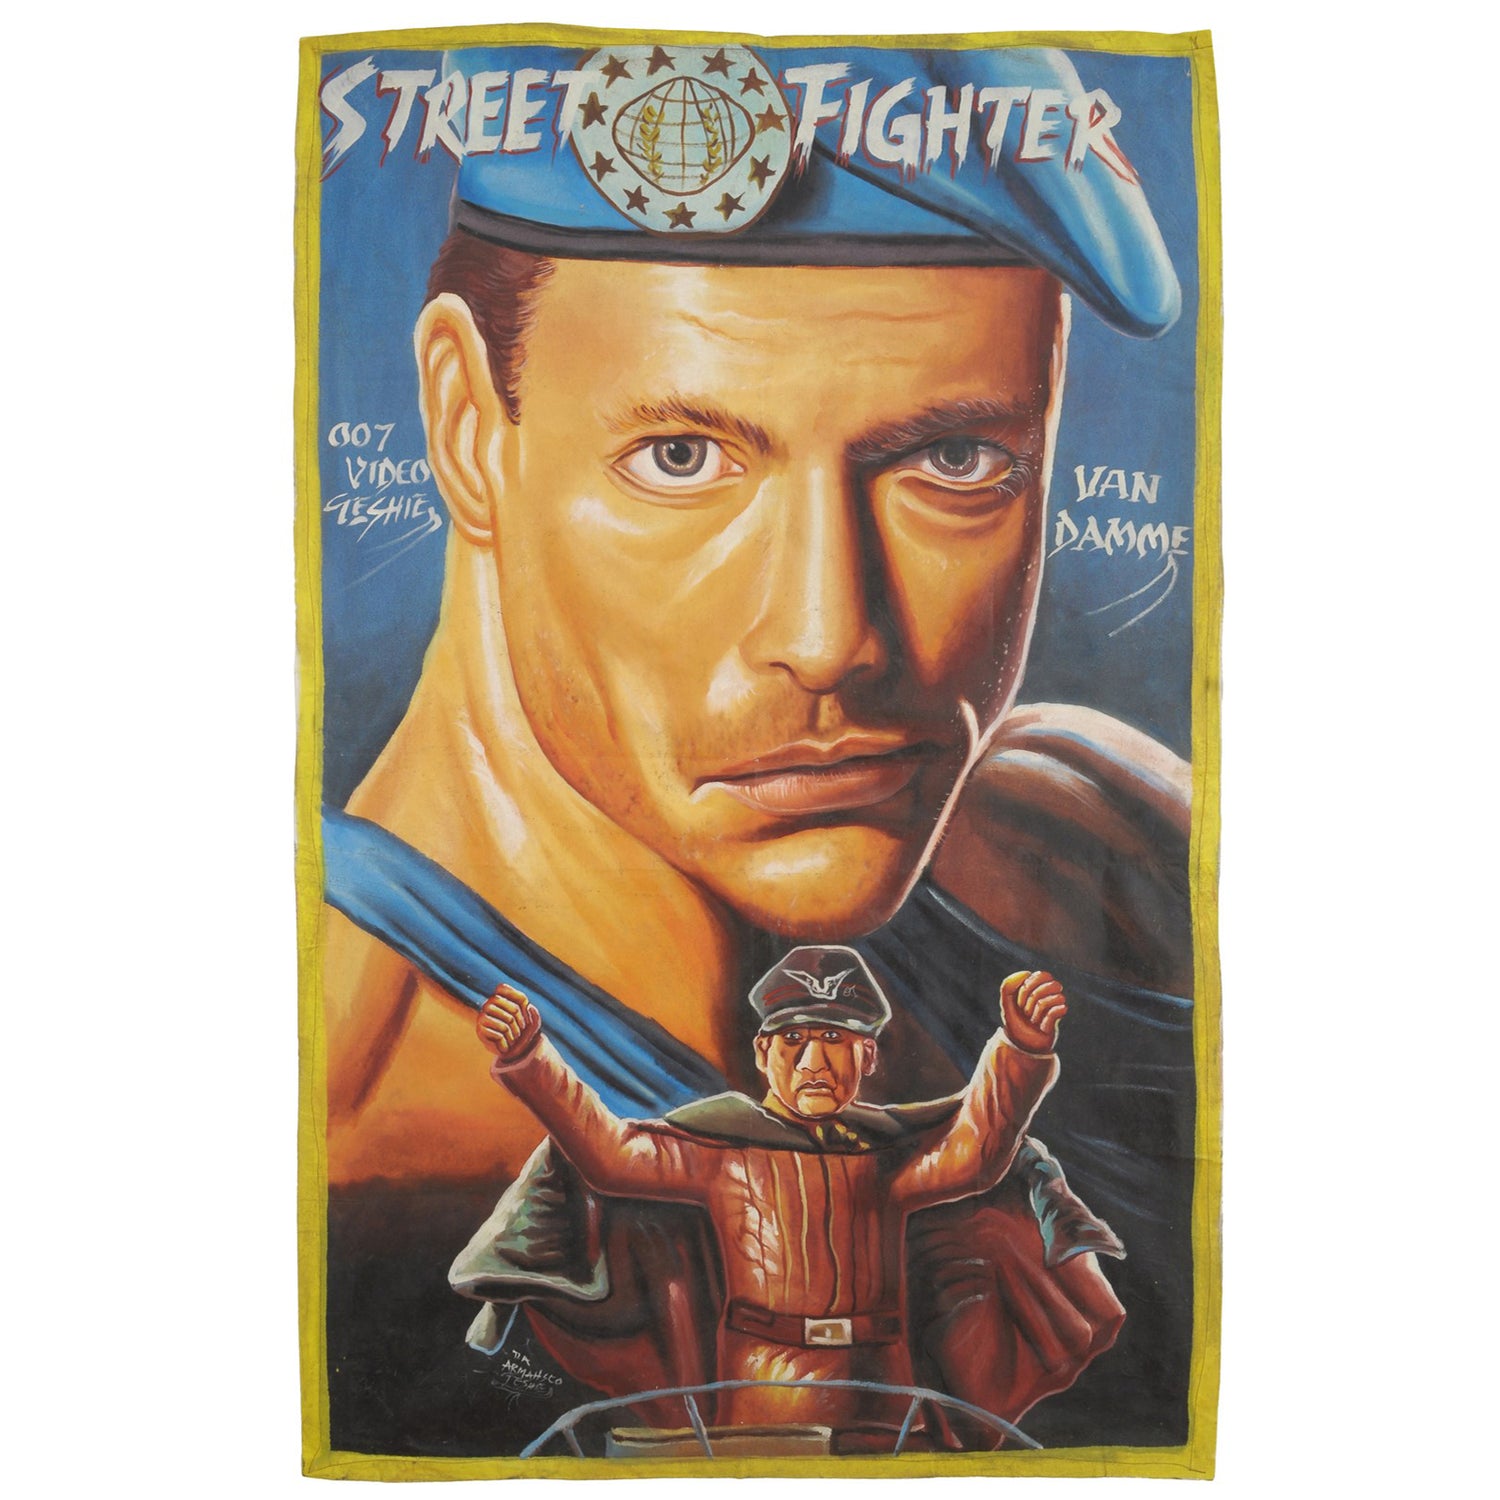 STREET FIGHTER MOVIE POSTER HAND PAINTED IN GHANA FOR THE LOCAL CINEMA